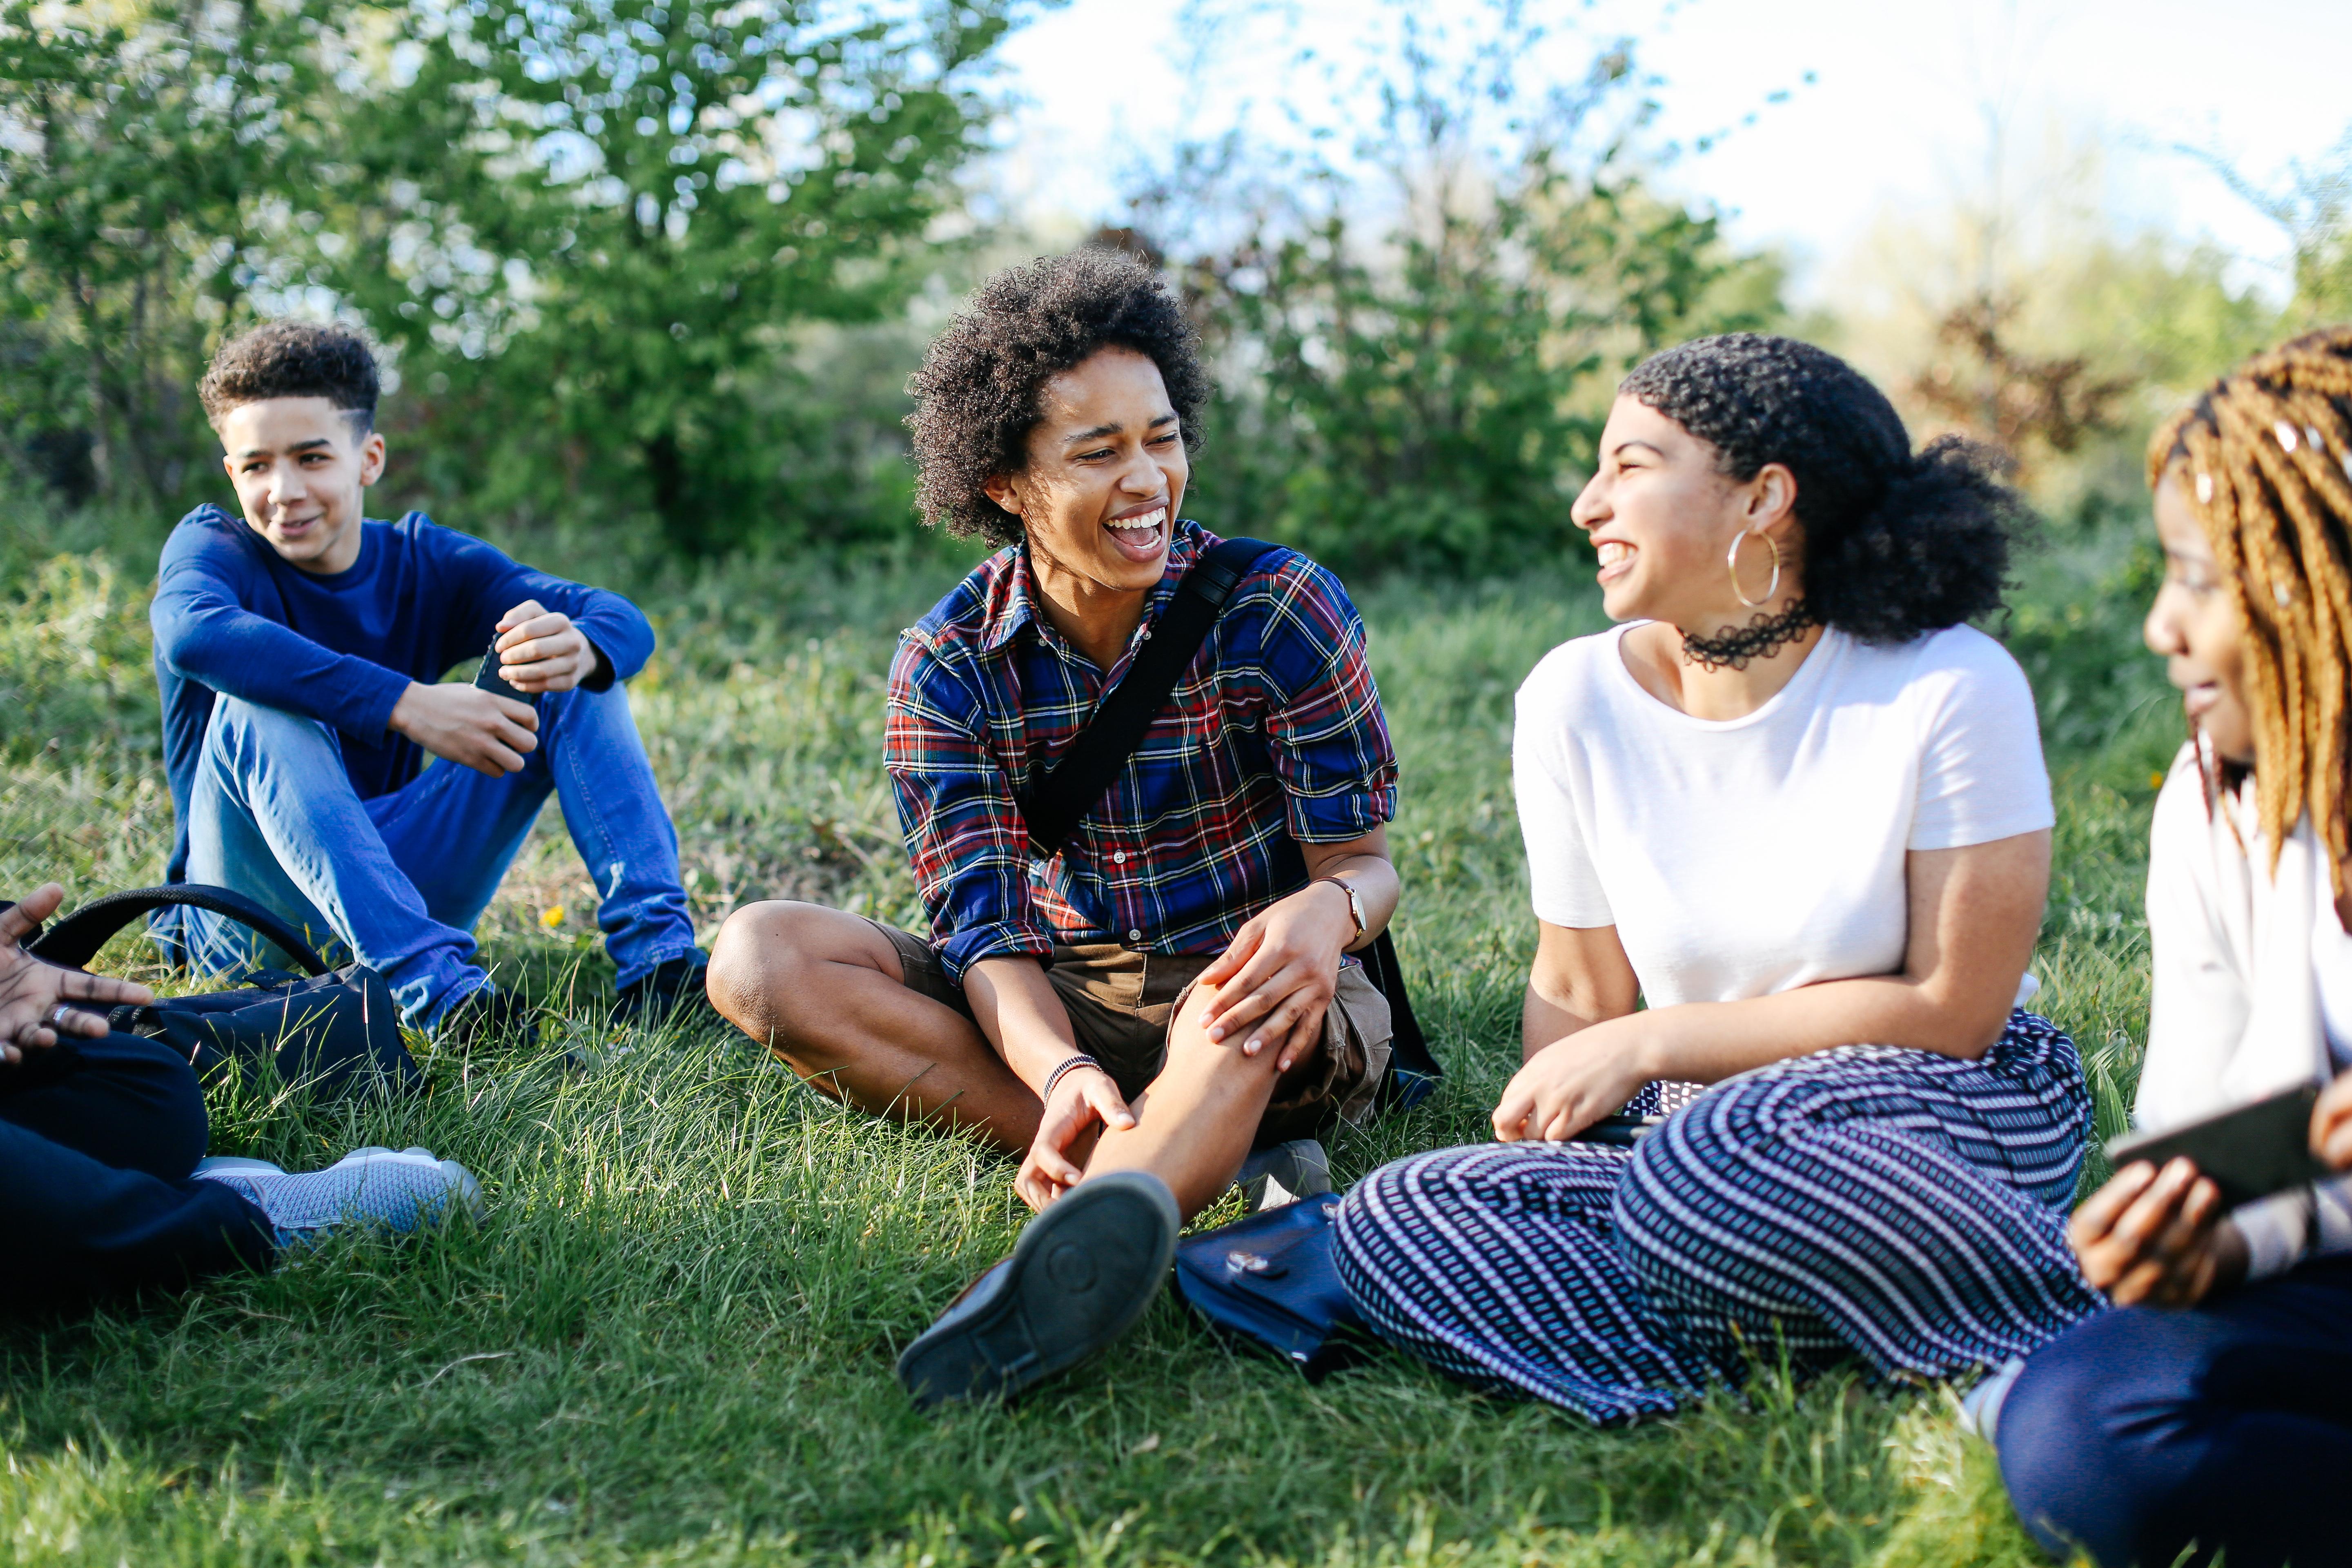 group of teens smiling and hanging out in nature